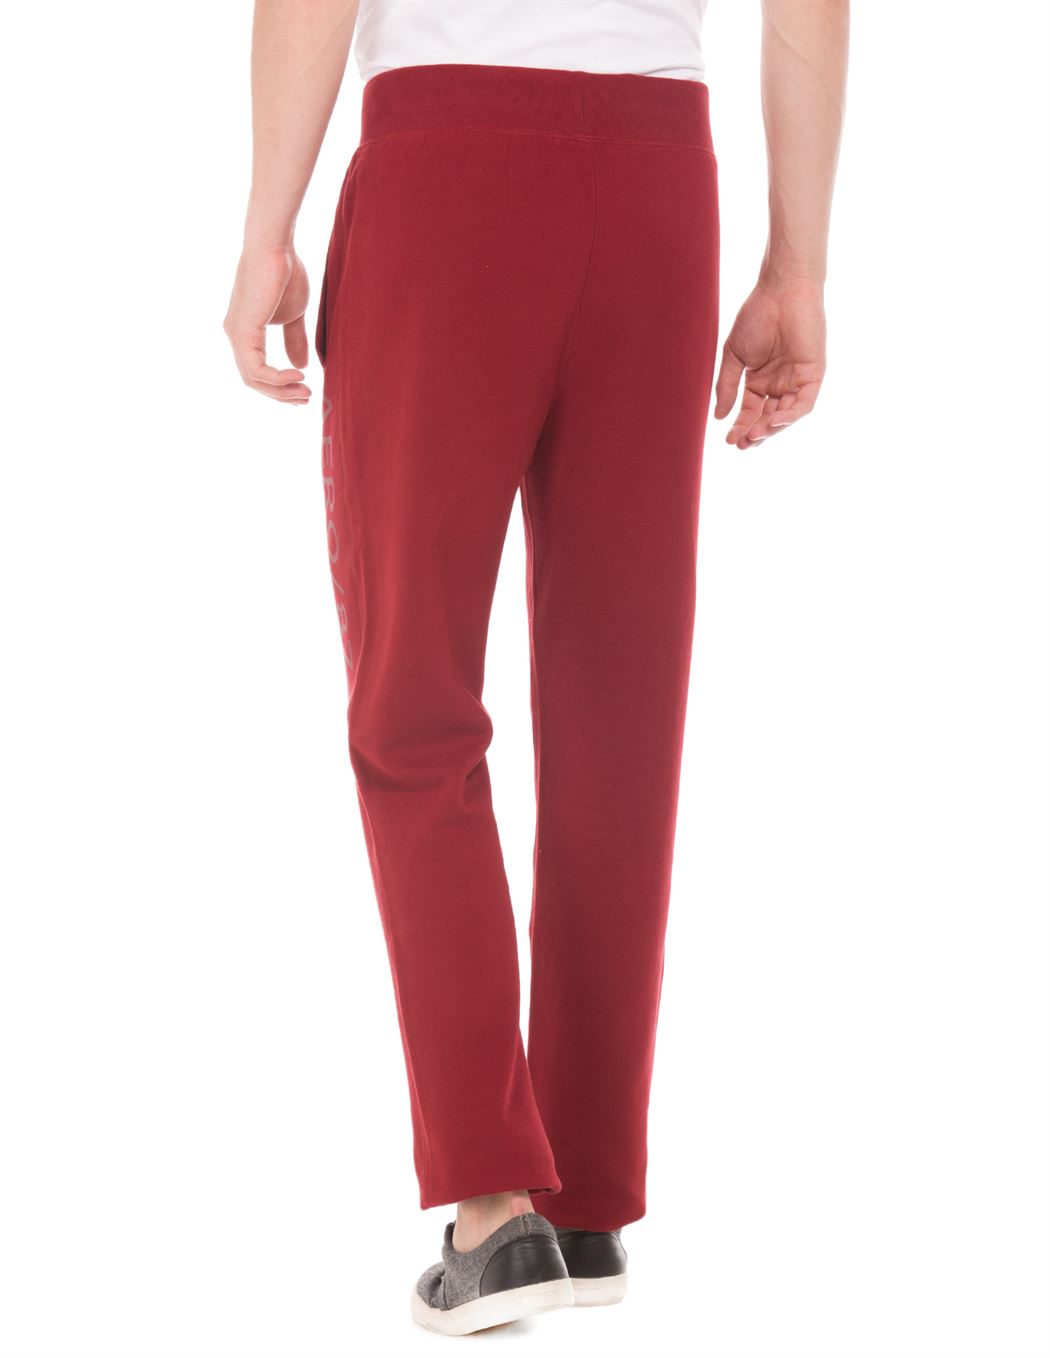 Aeropostale Men Casual Wear Red  Track Pant